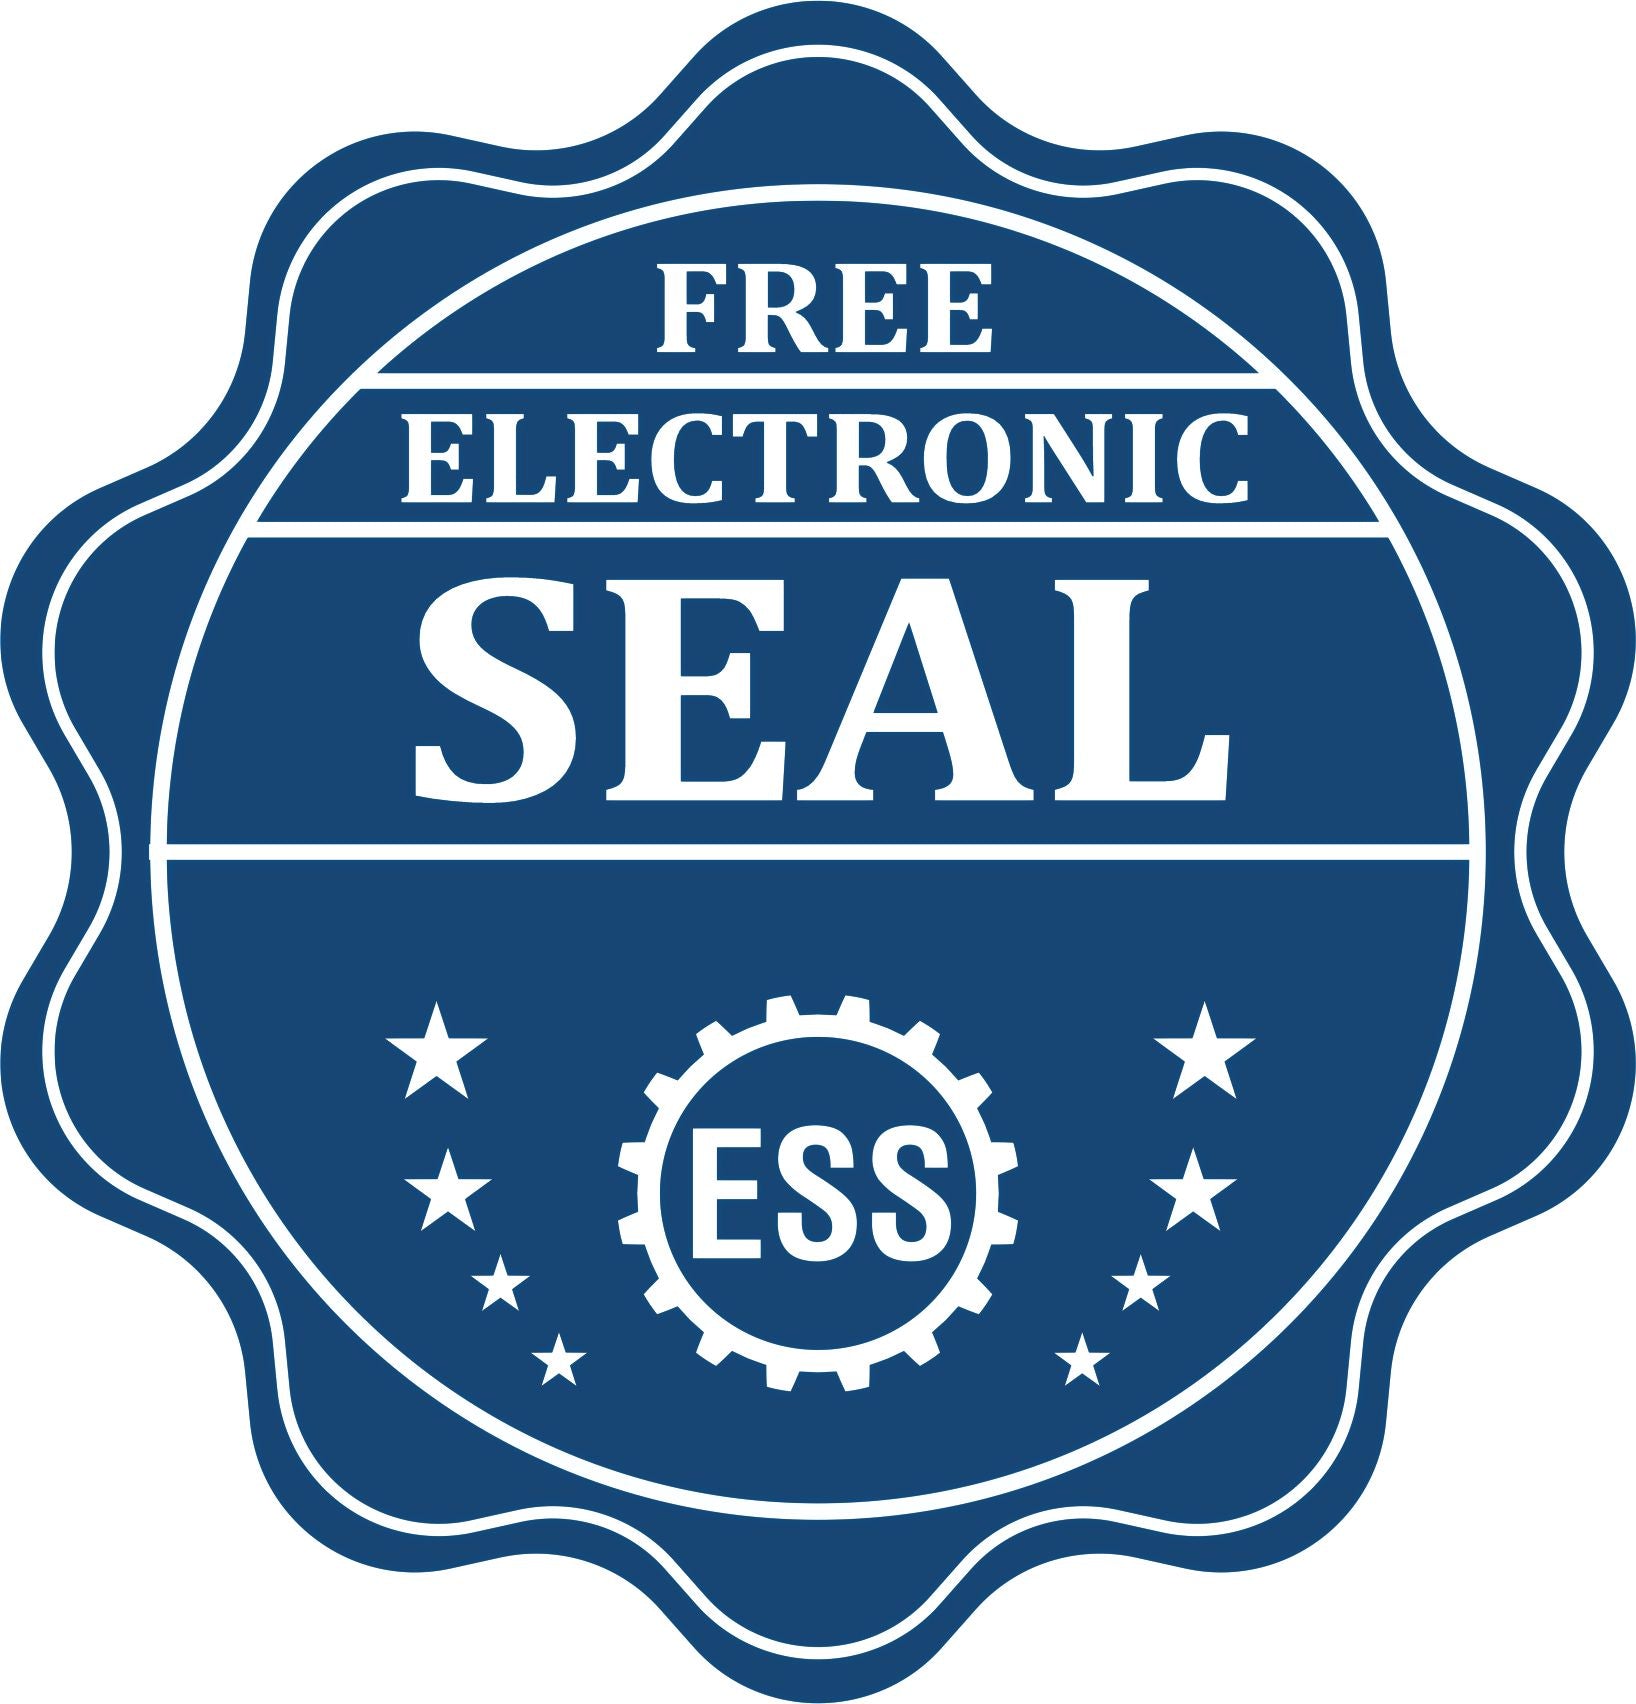 A badge showing a free electronic seal for the New Jersey Geologist Desk Seal with stars and the ESS gear on the emblem.